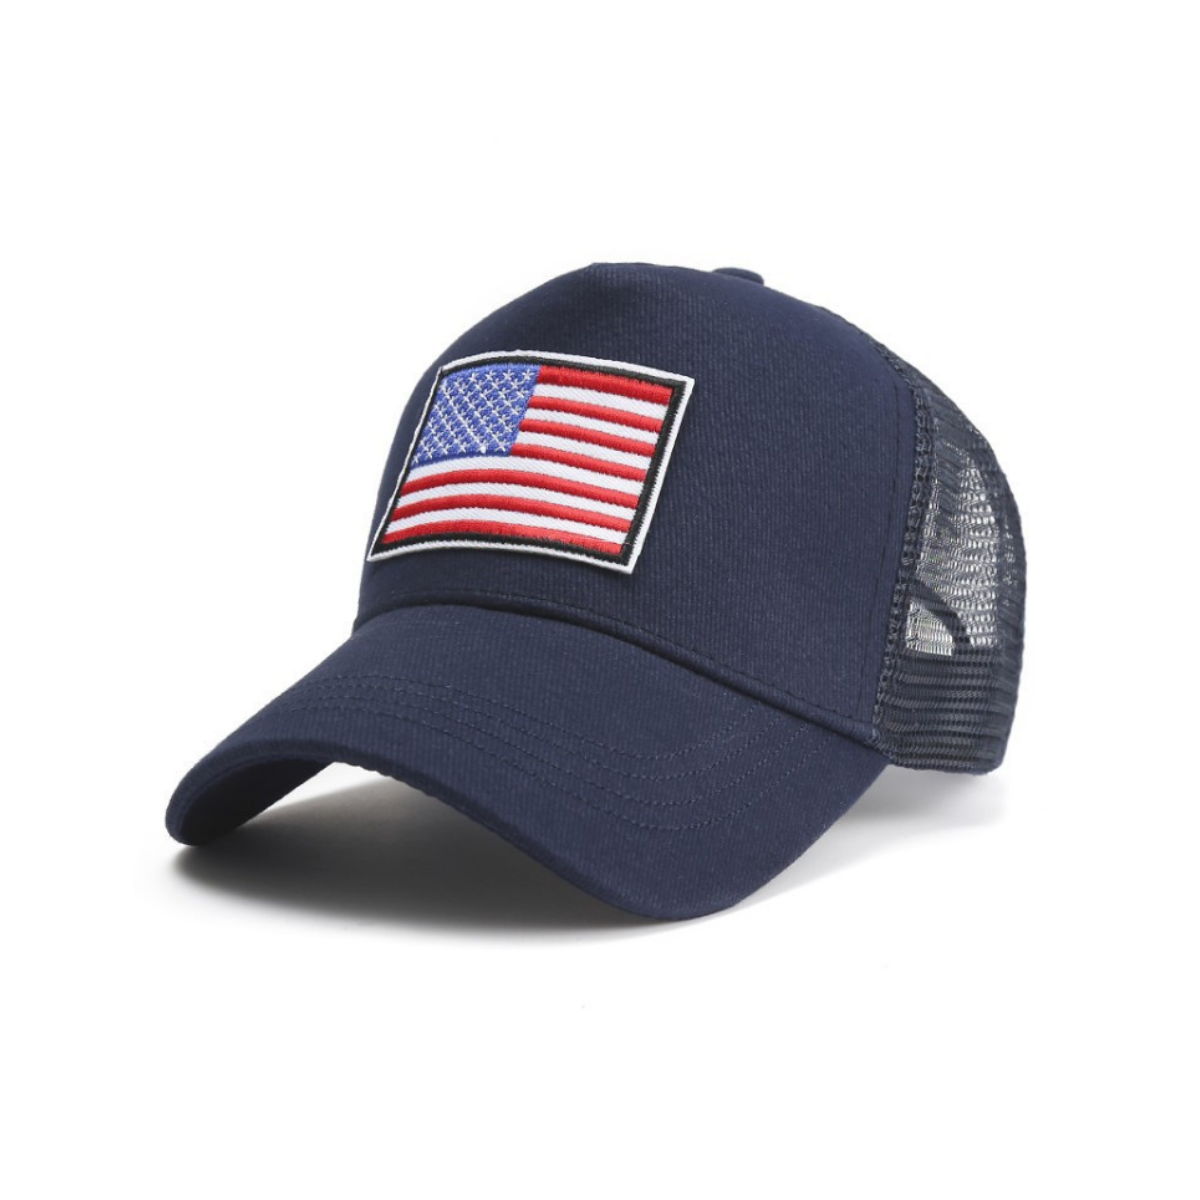 American Flag Trucker Hat with Adjustable Strap-25